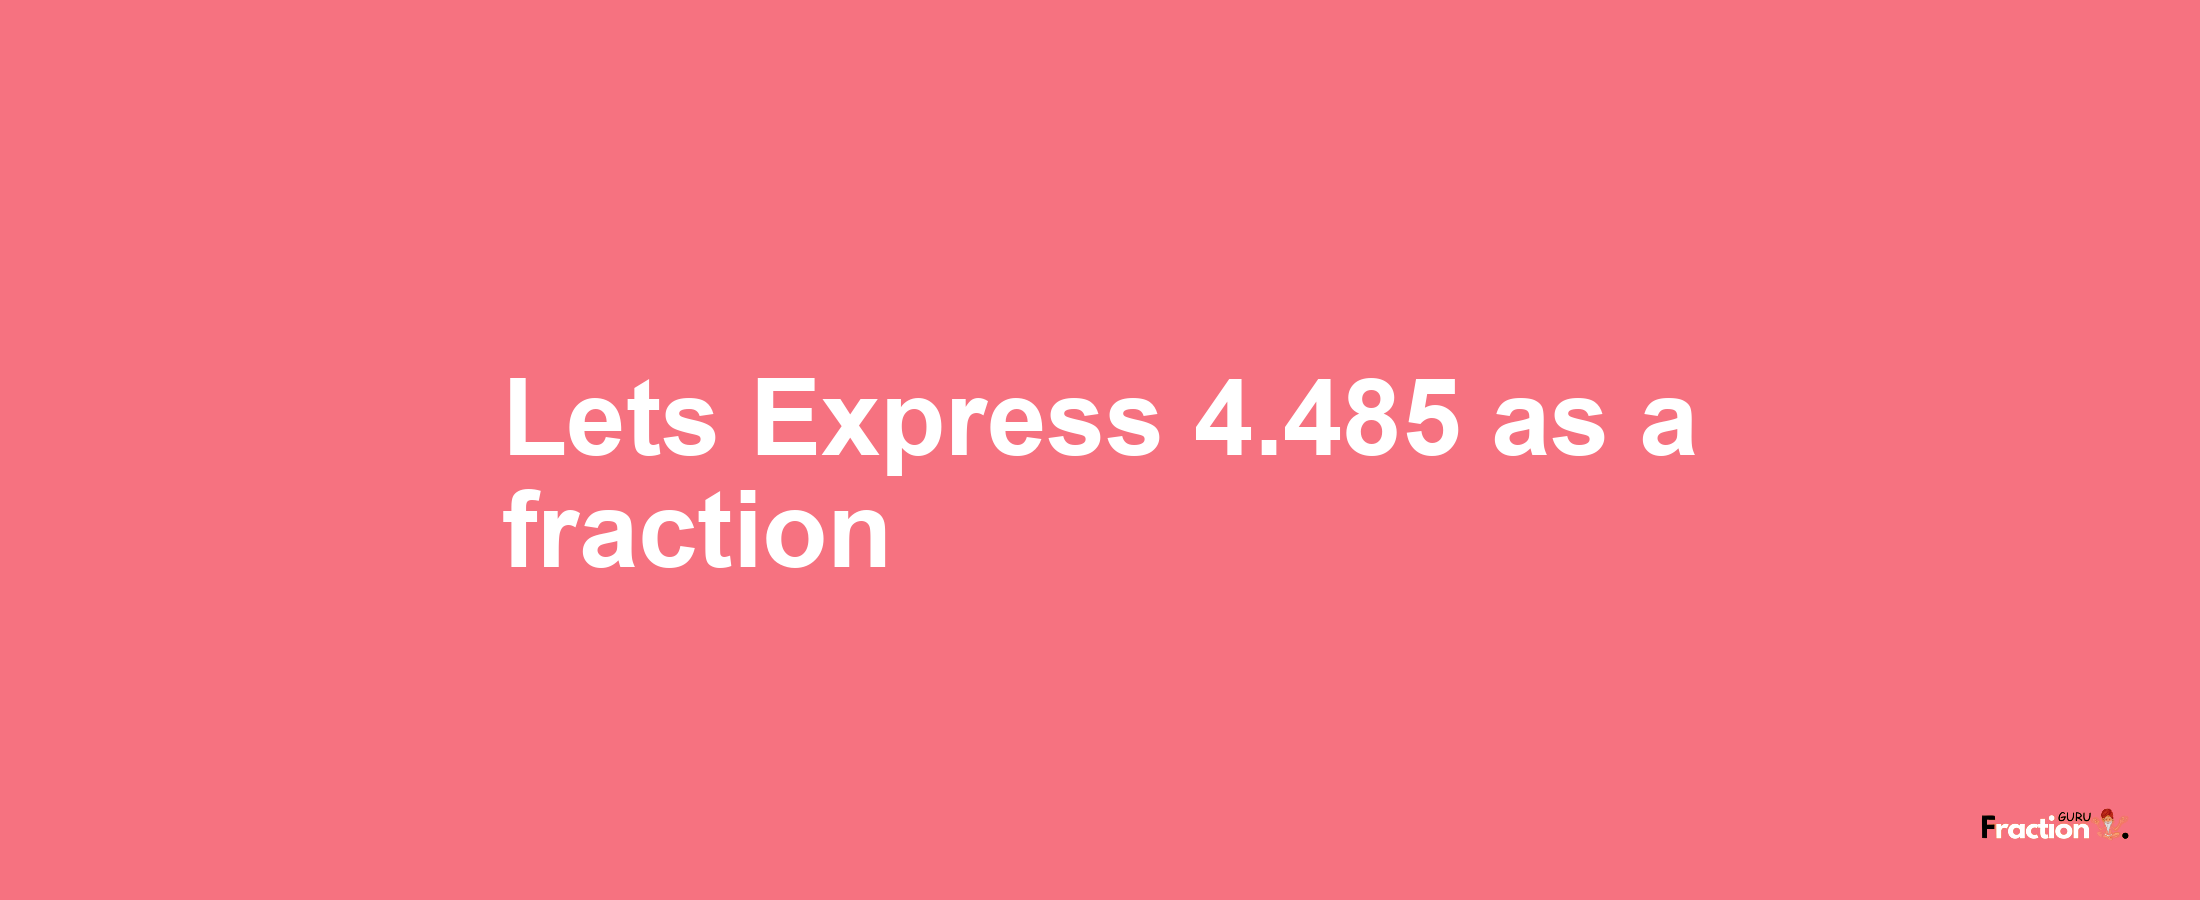 Lets Express 4.485 as afraction